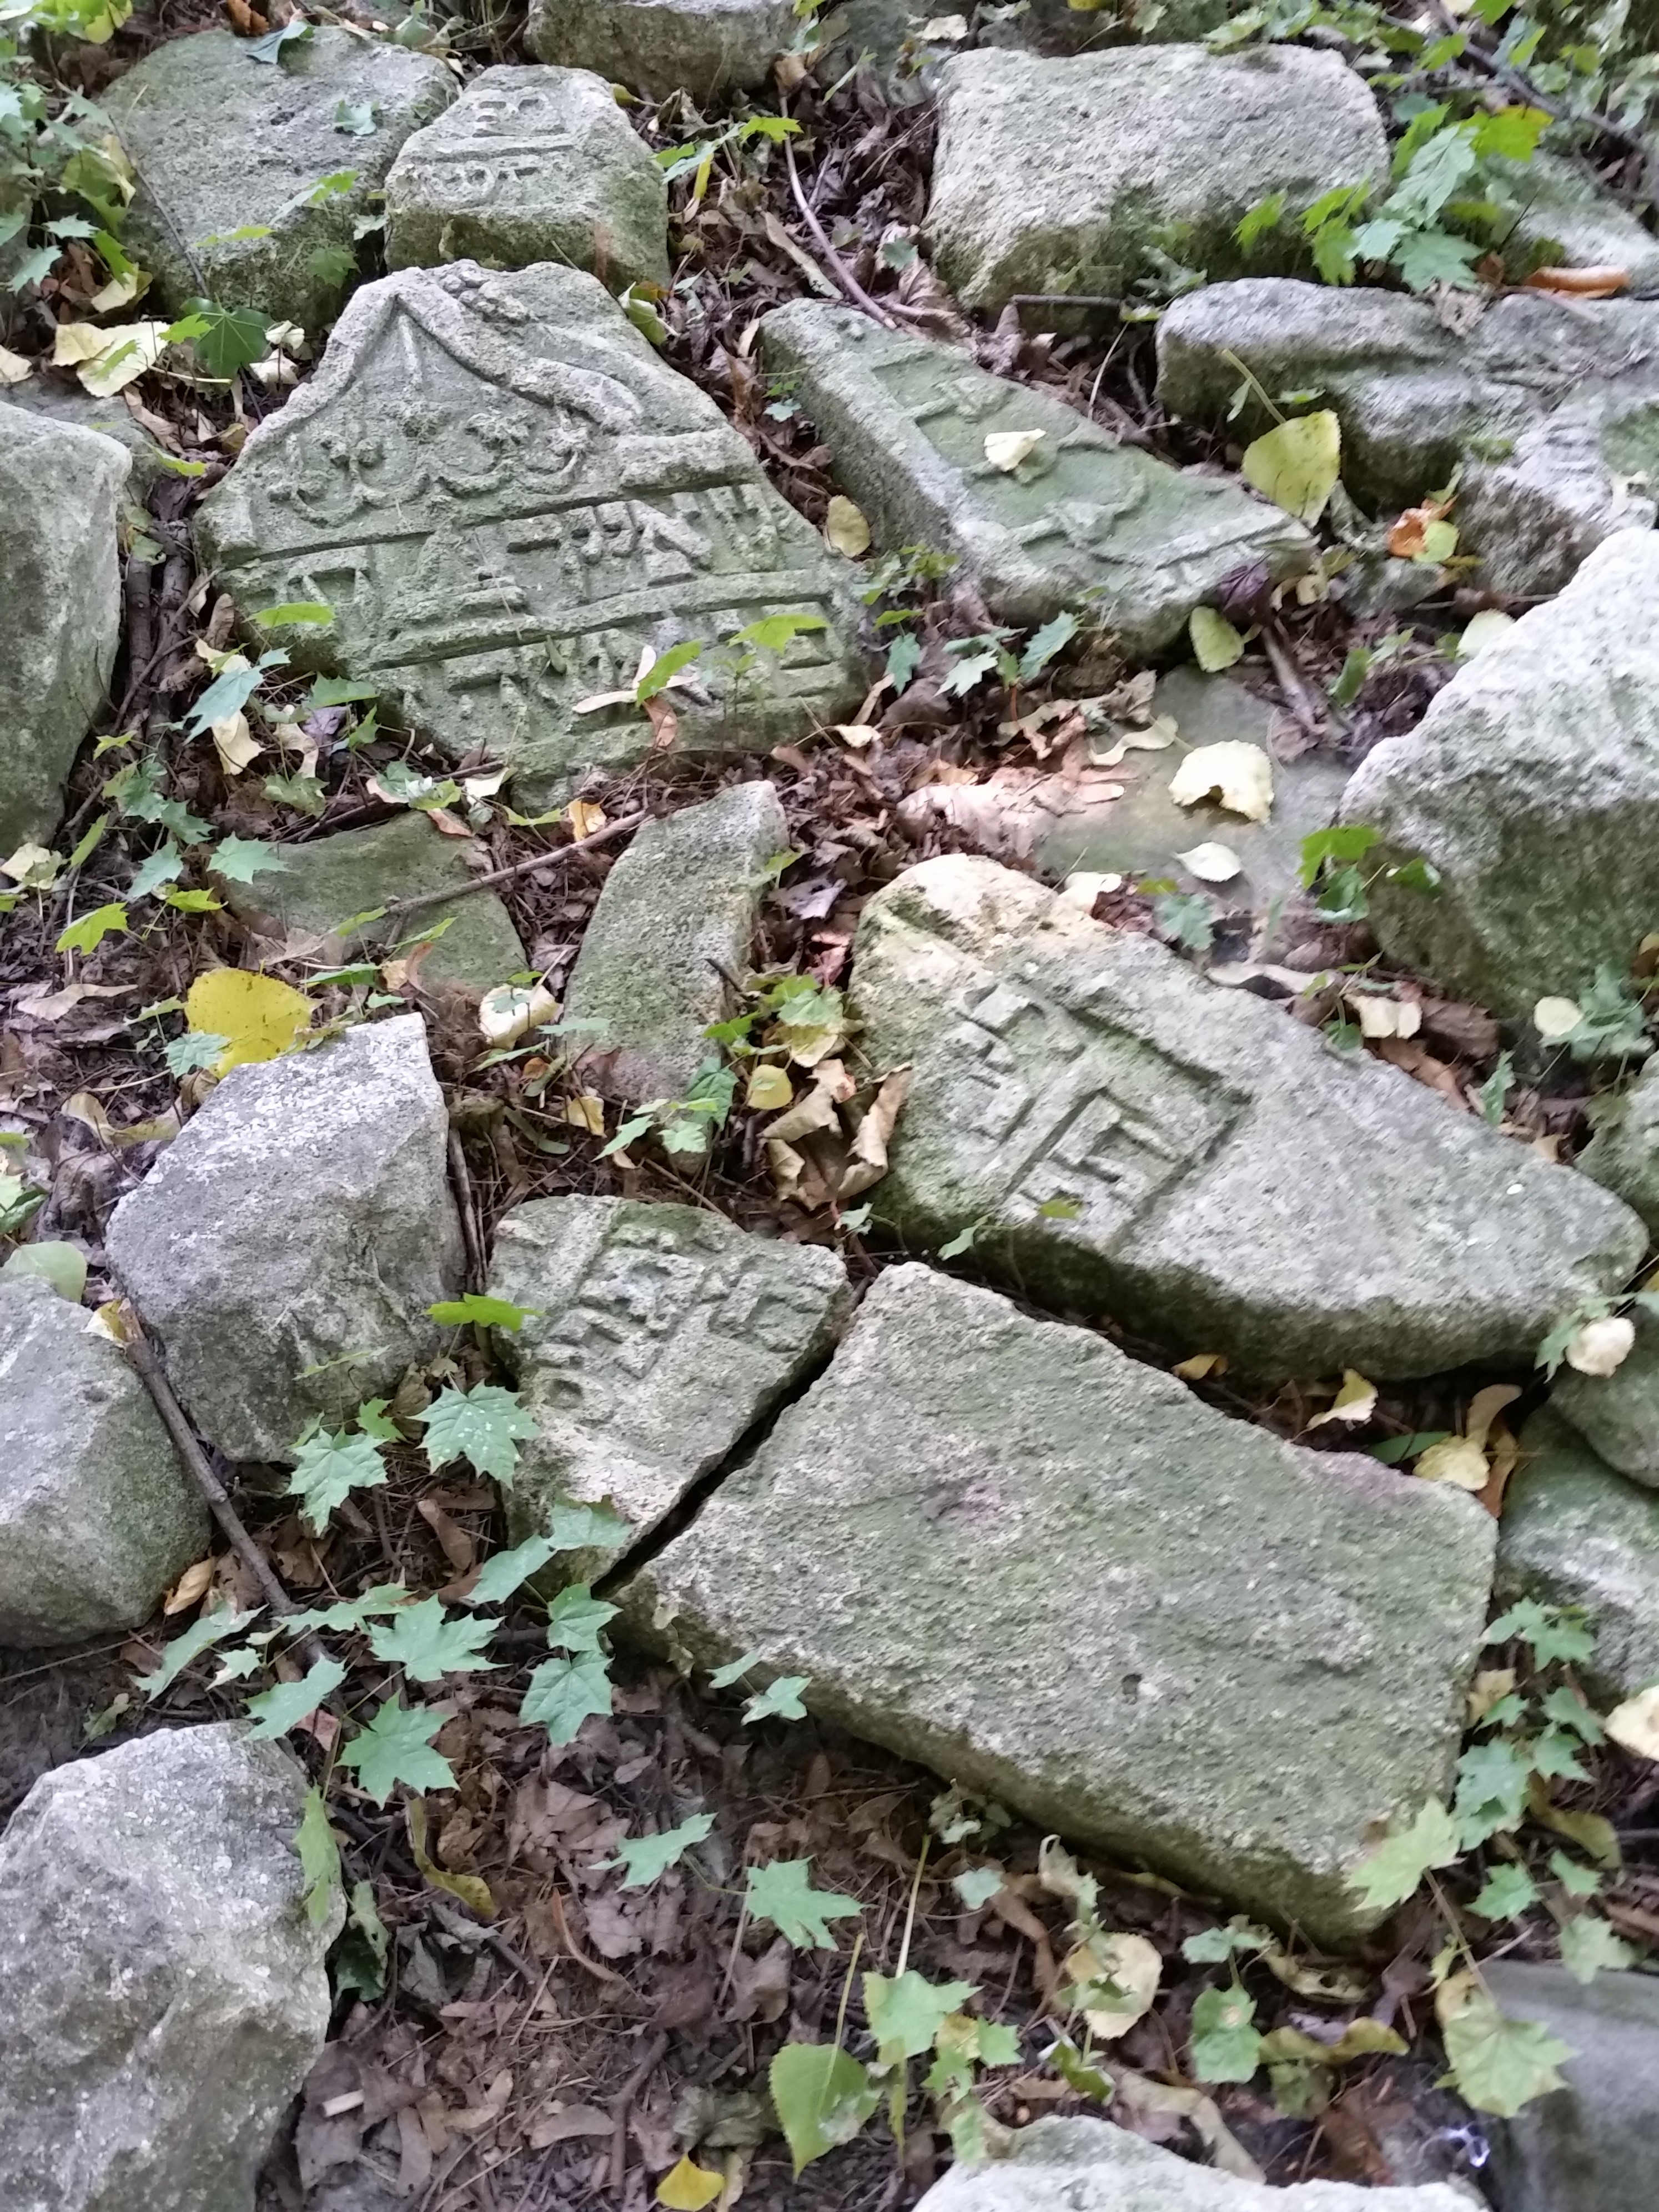 Gravestone fragments collected by Maxim, Lviv